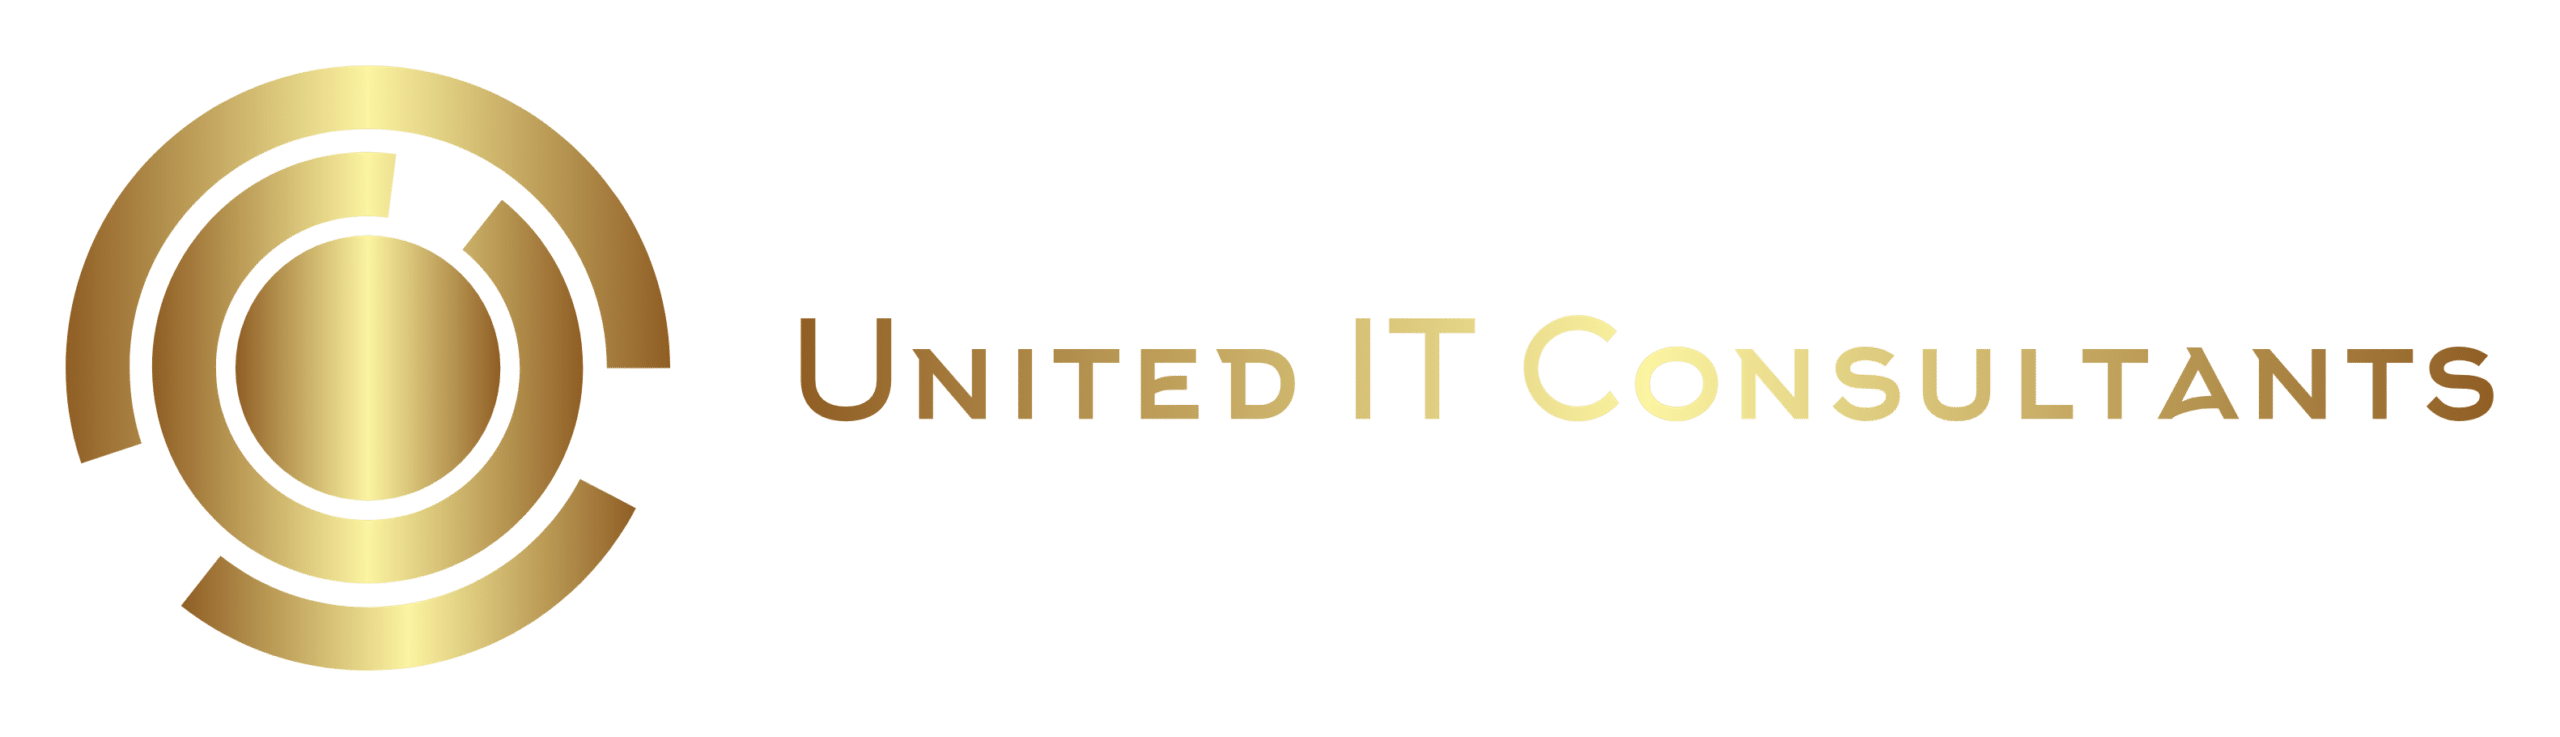 Managed IT Services Provider | United IT Consultants